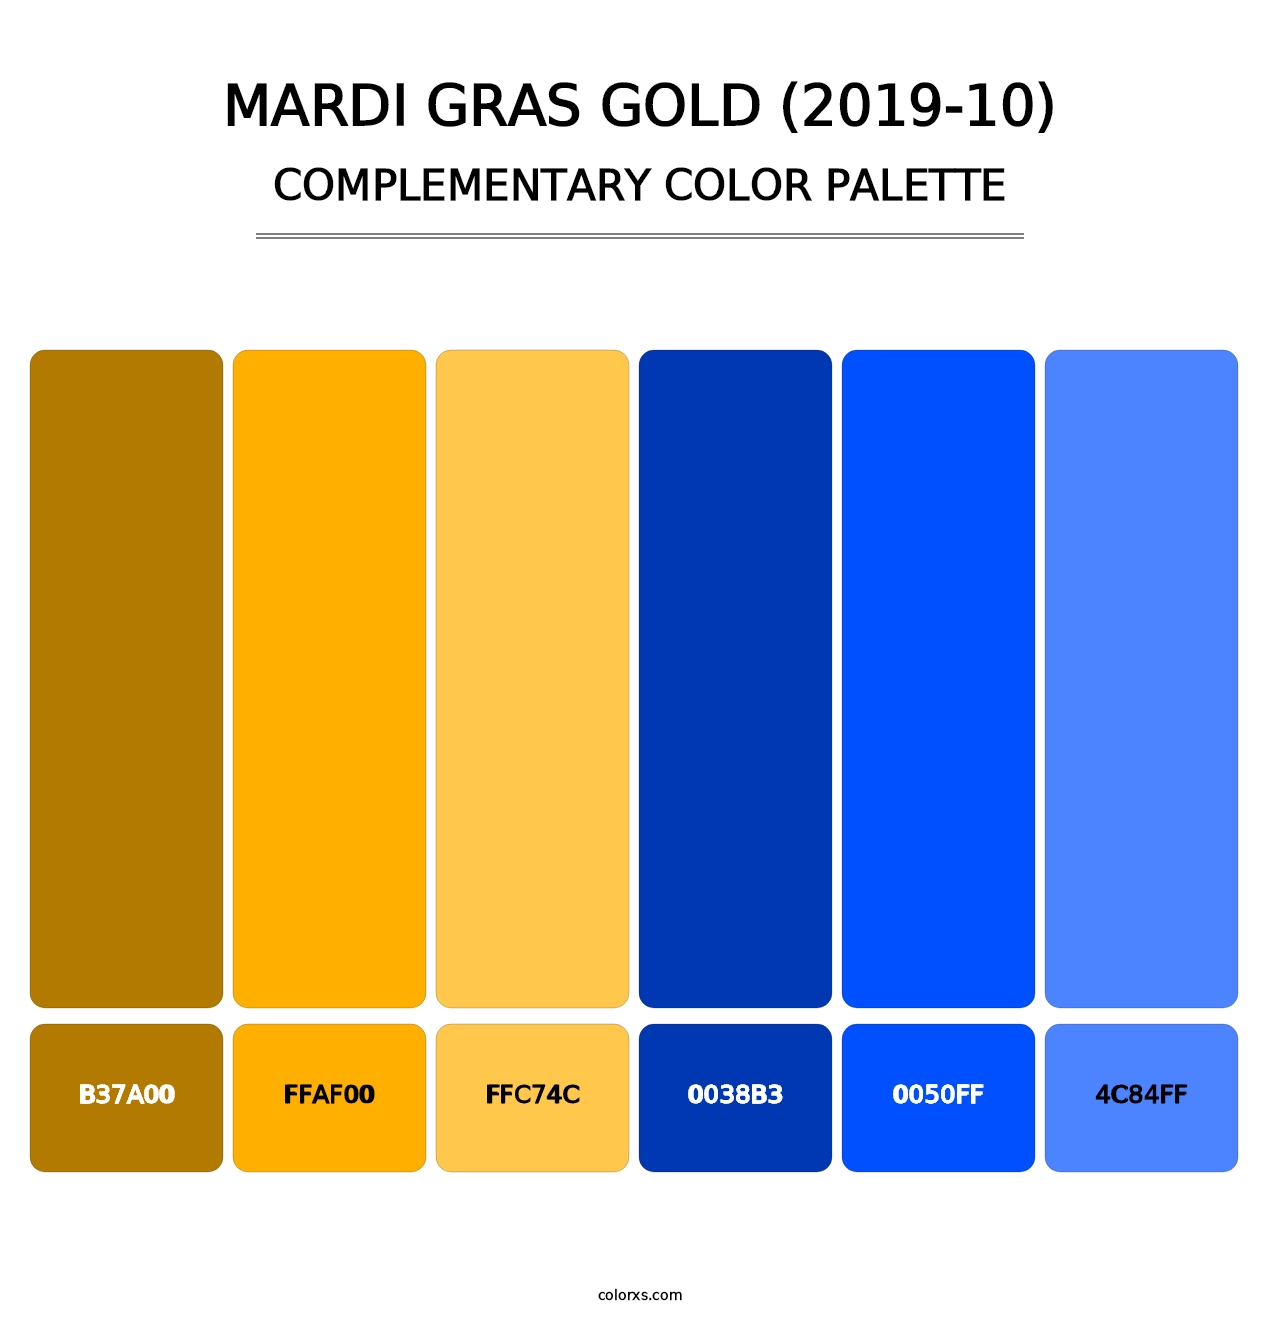 Mardi Gras Gold (2019-10) - Complementary Color Palette